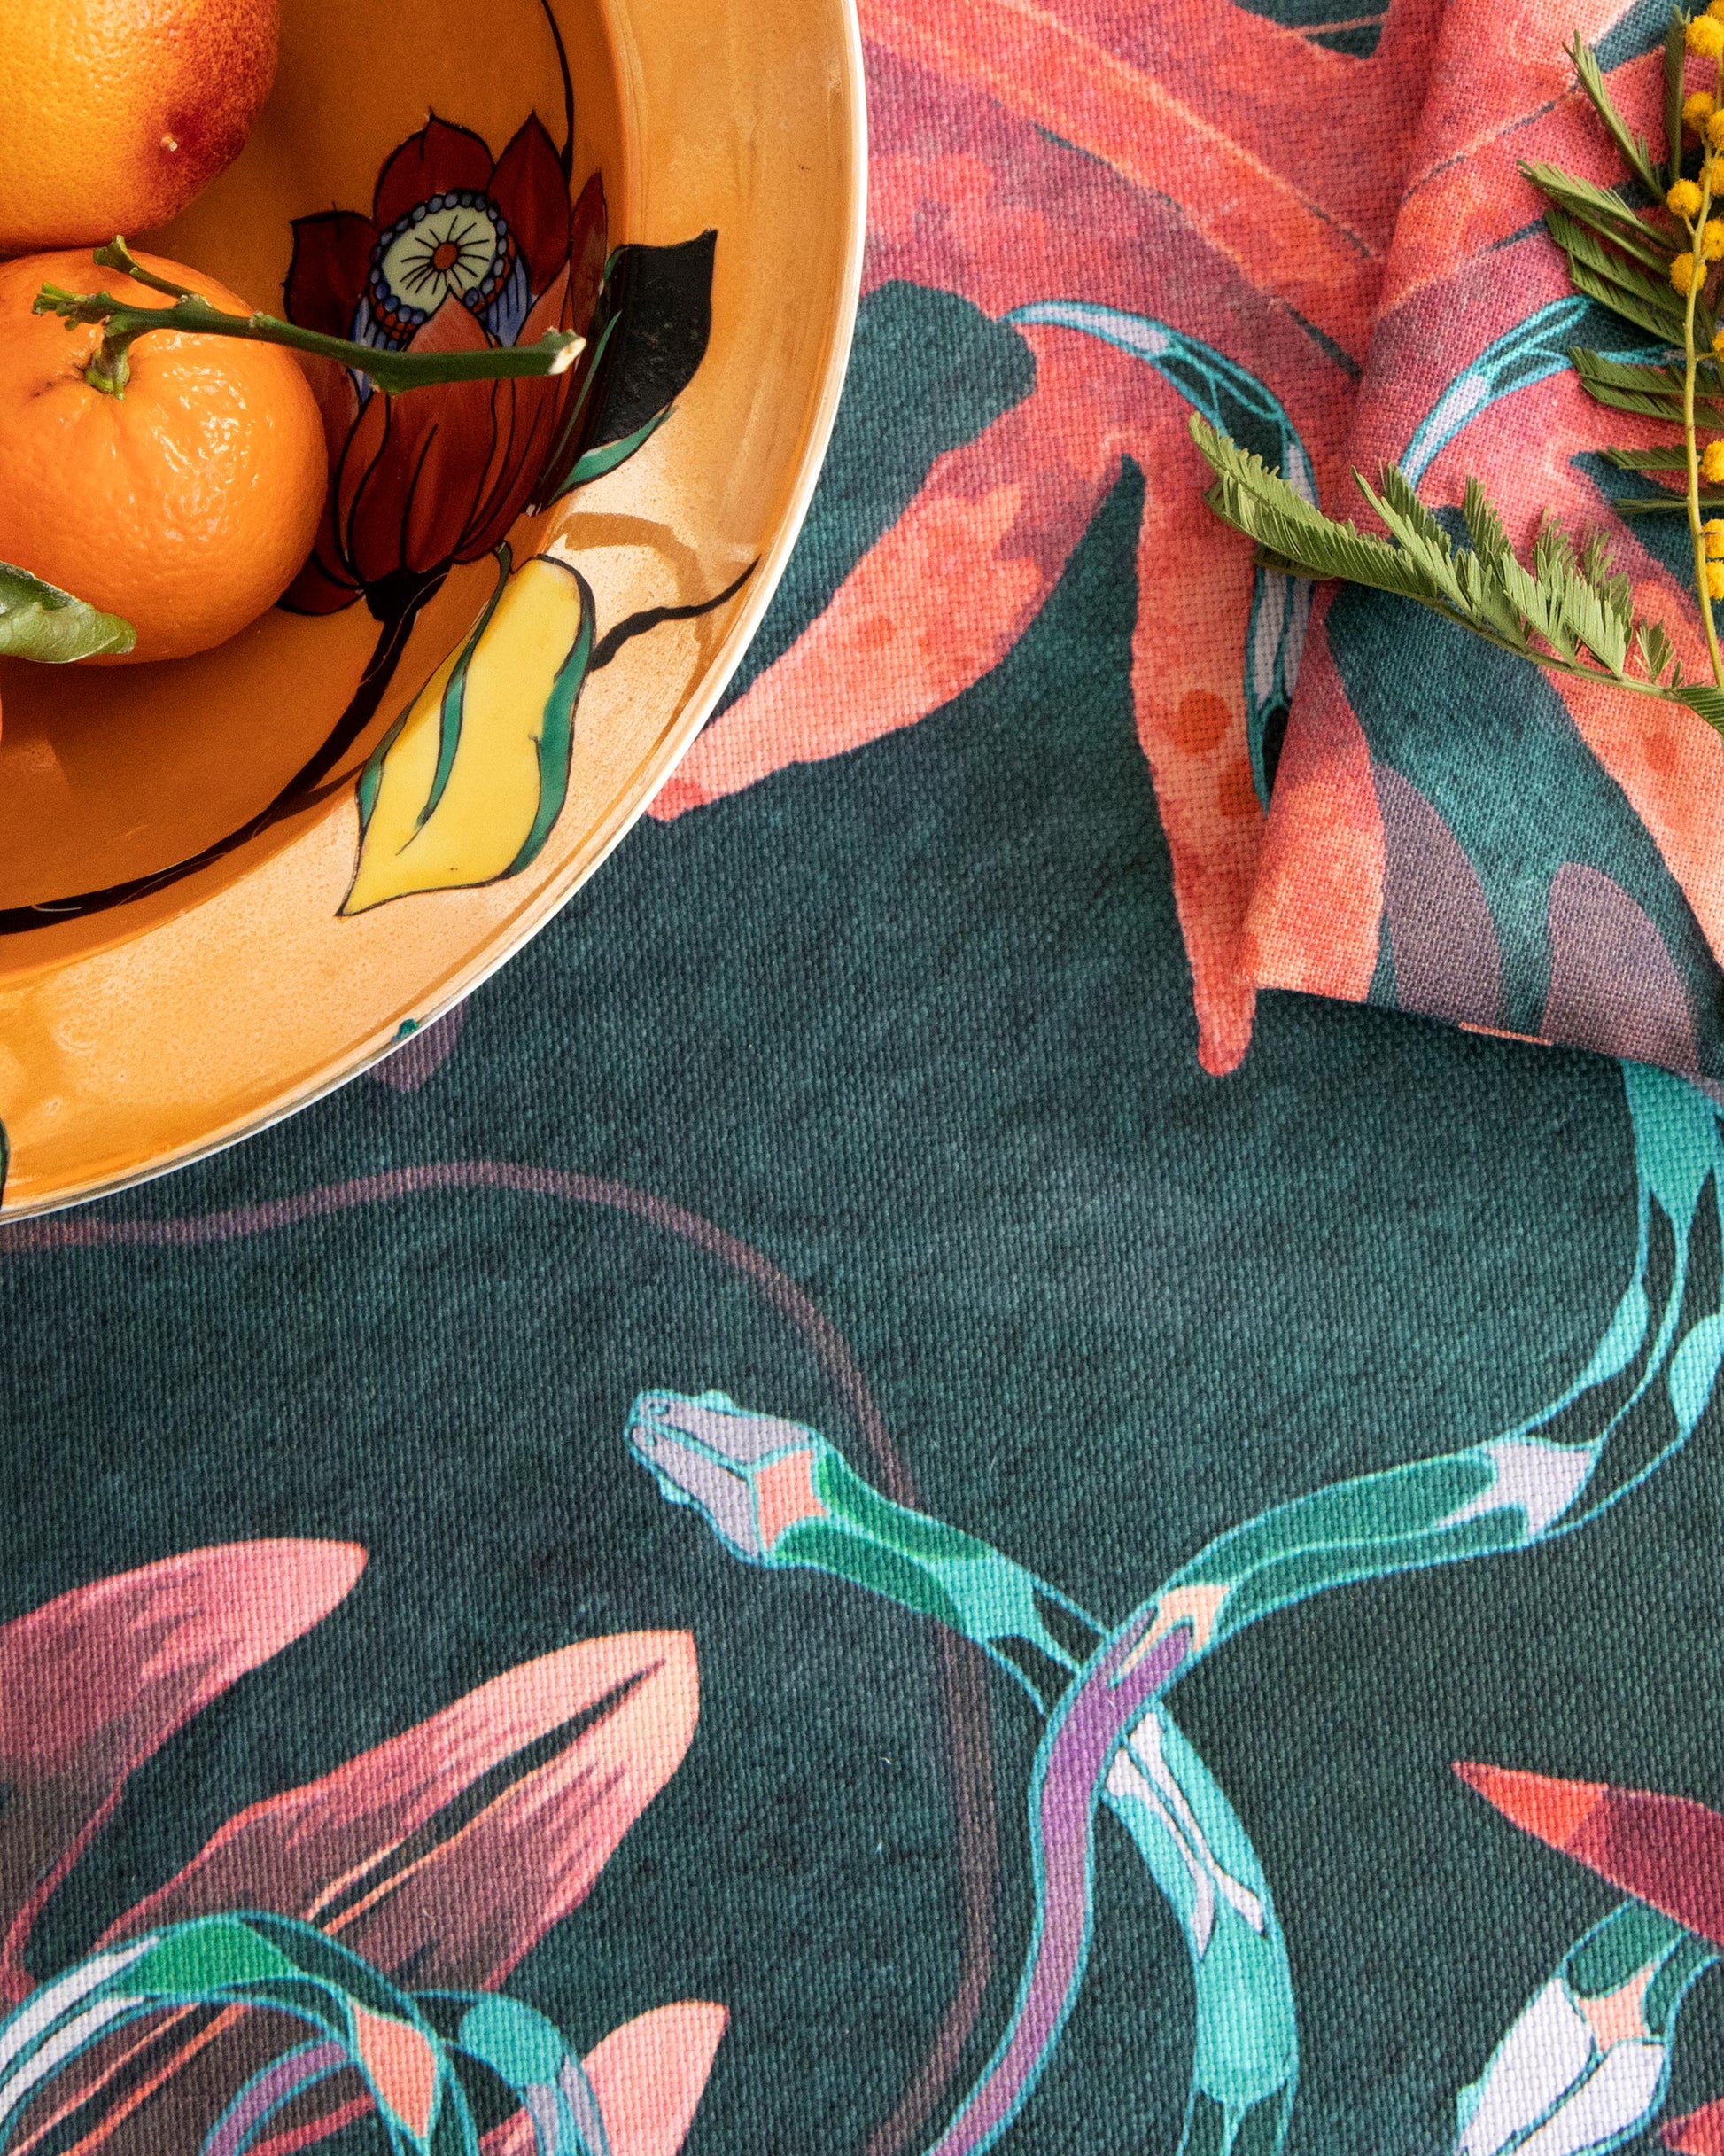 A bowl of oranges on a table with an Edera Fabric Beryl tablecloth